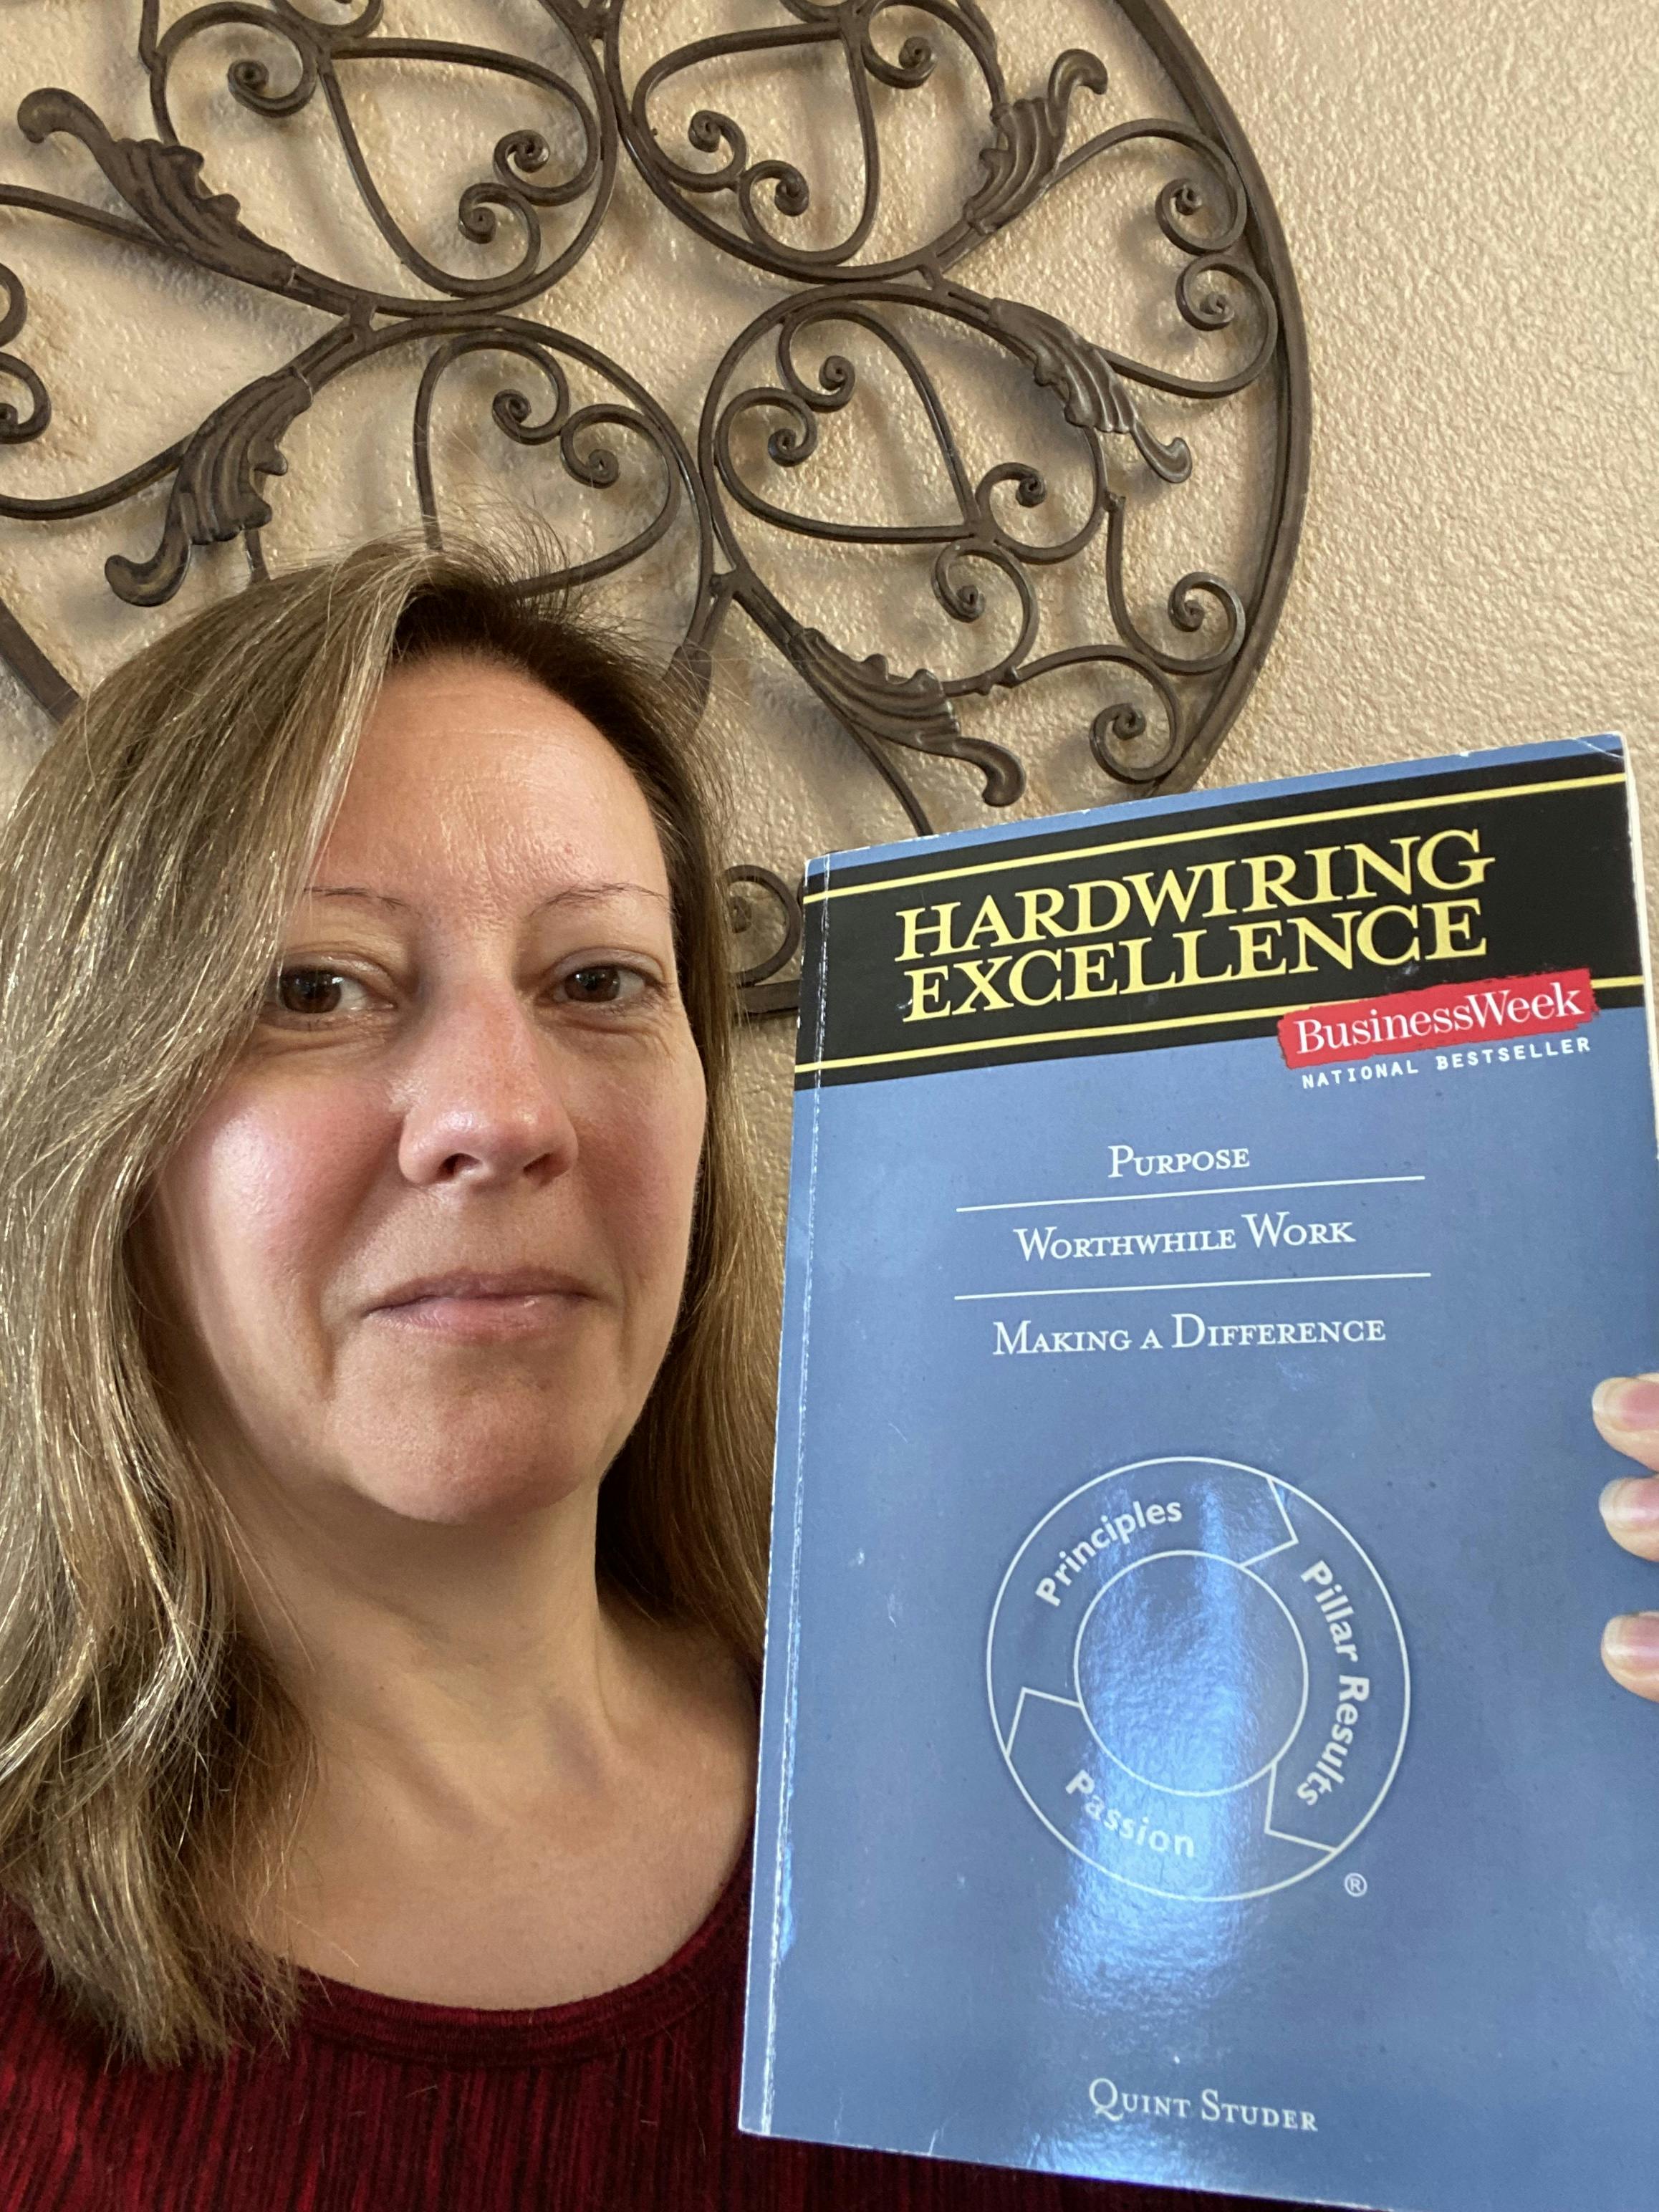 Stephanie holding up the book "Hardwiring Excellence" by Quint Studer.